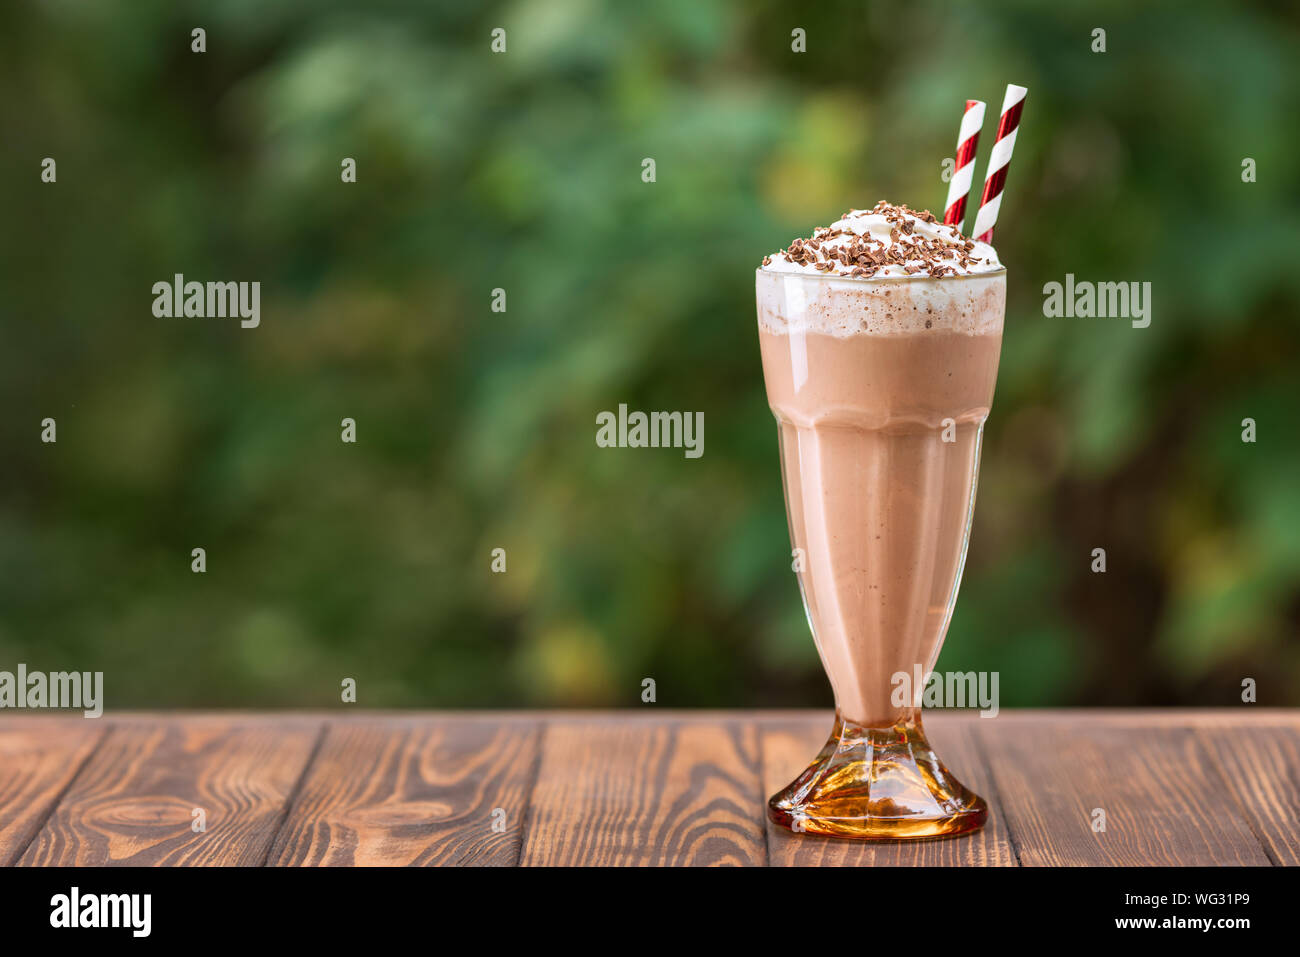 chocolate milkshake in glass with whipped cream on wooden table outdoors Stock Photo